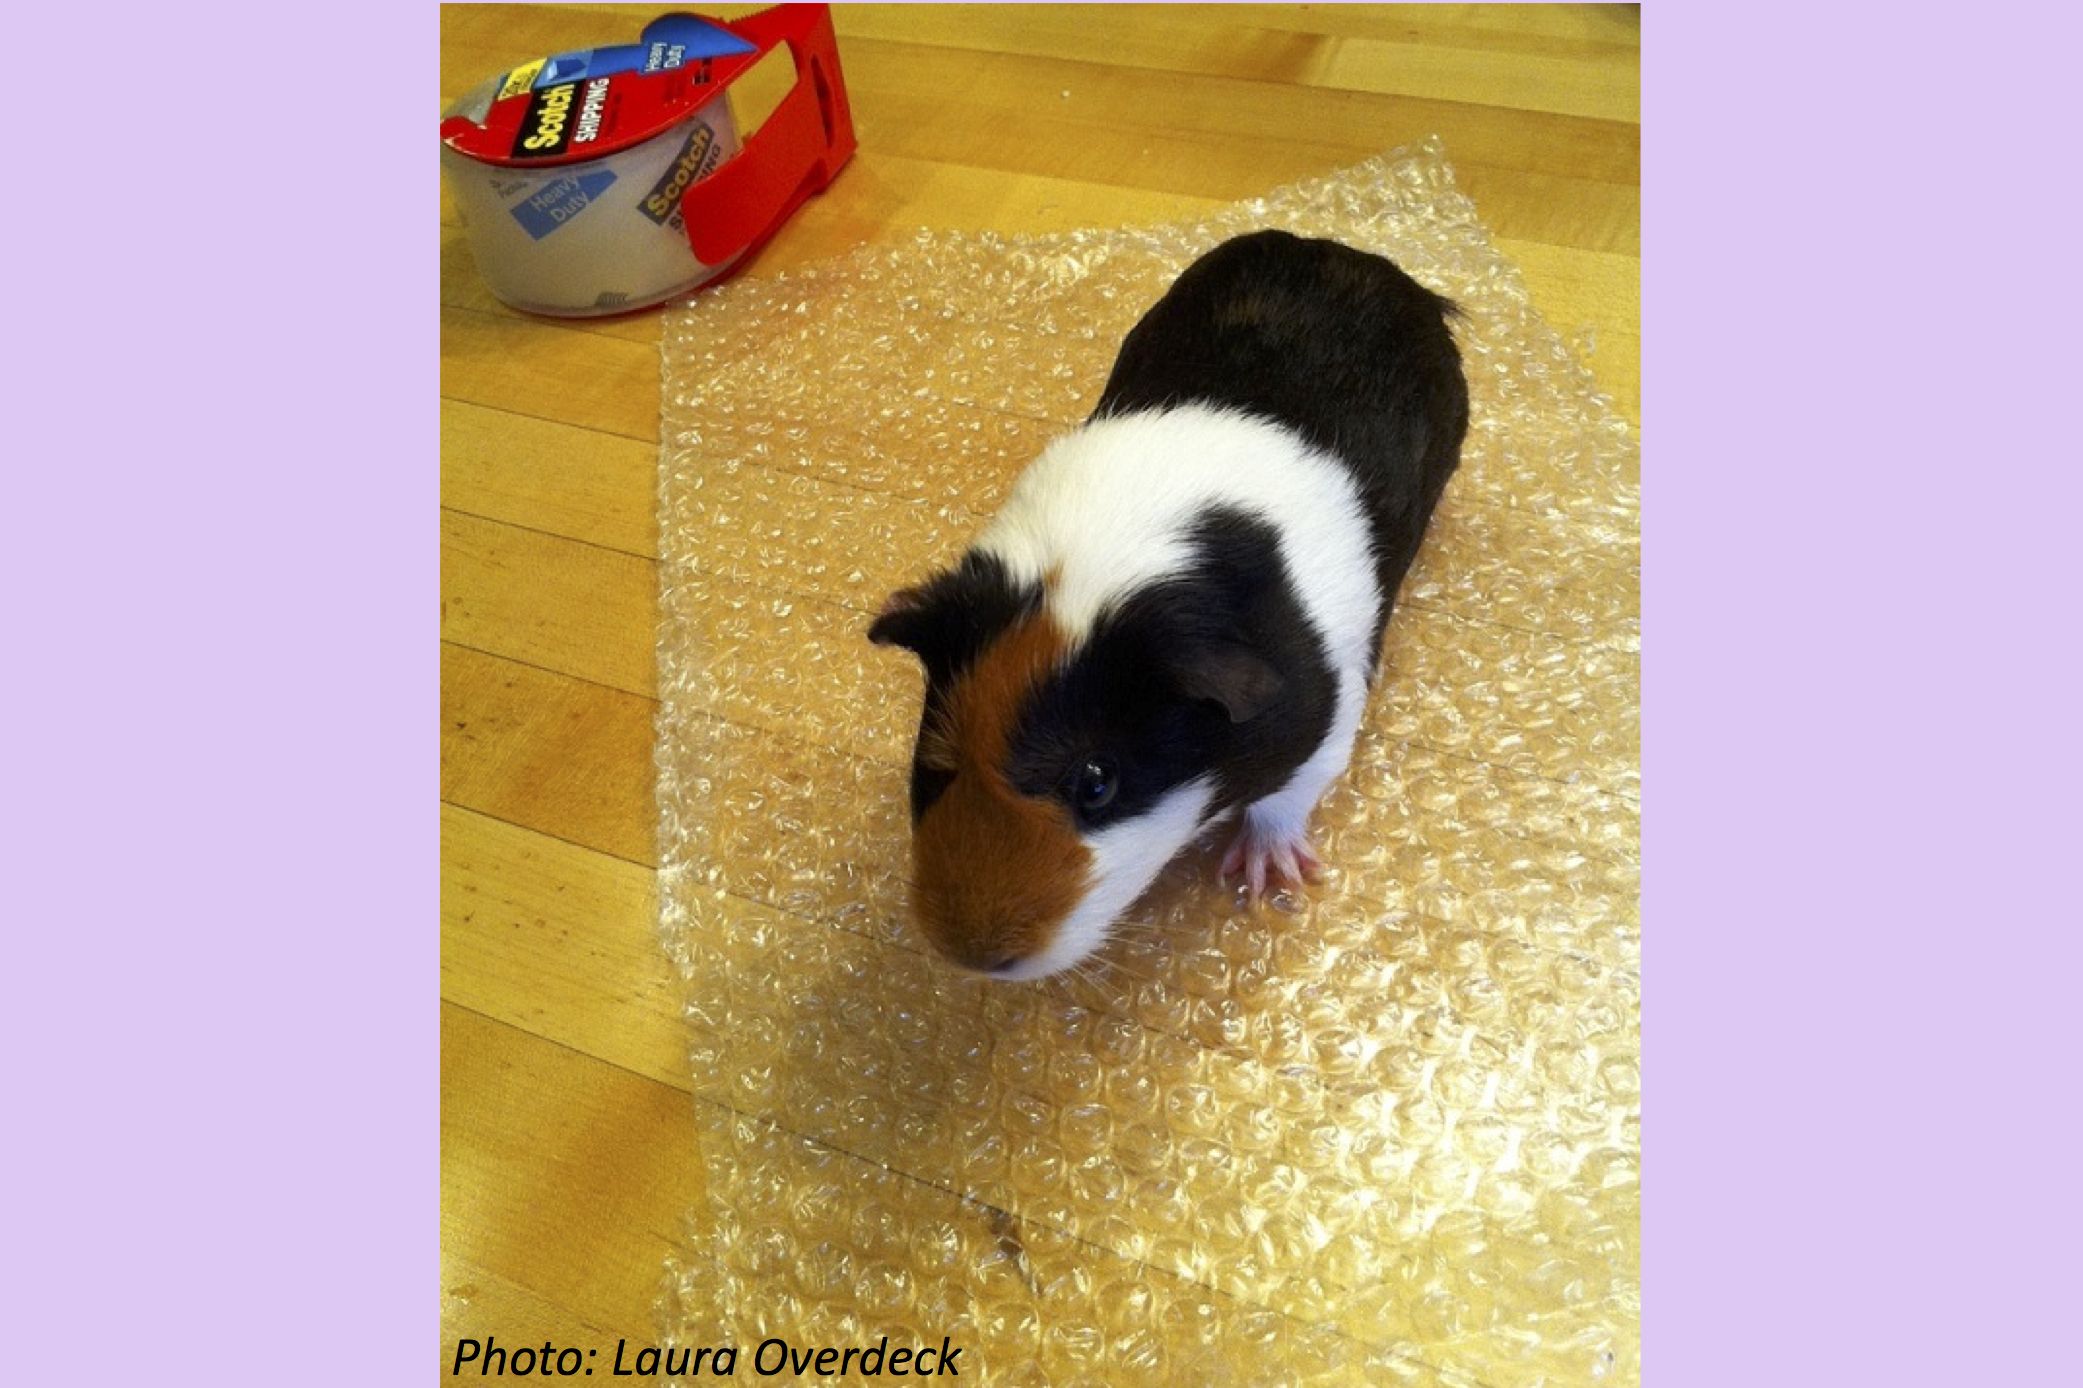 The Best Day for Bubble Wrap